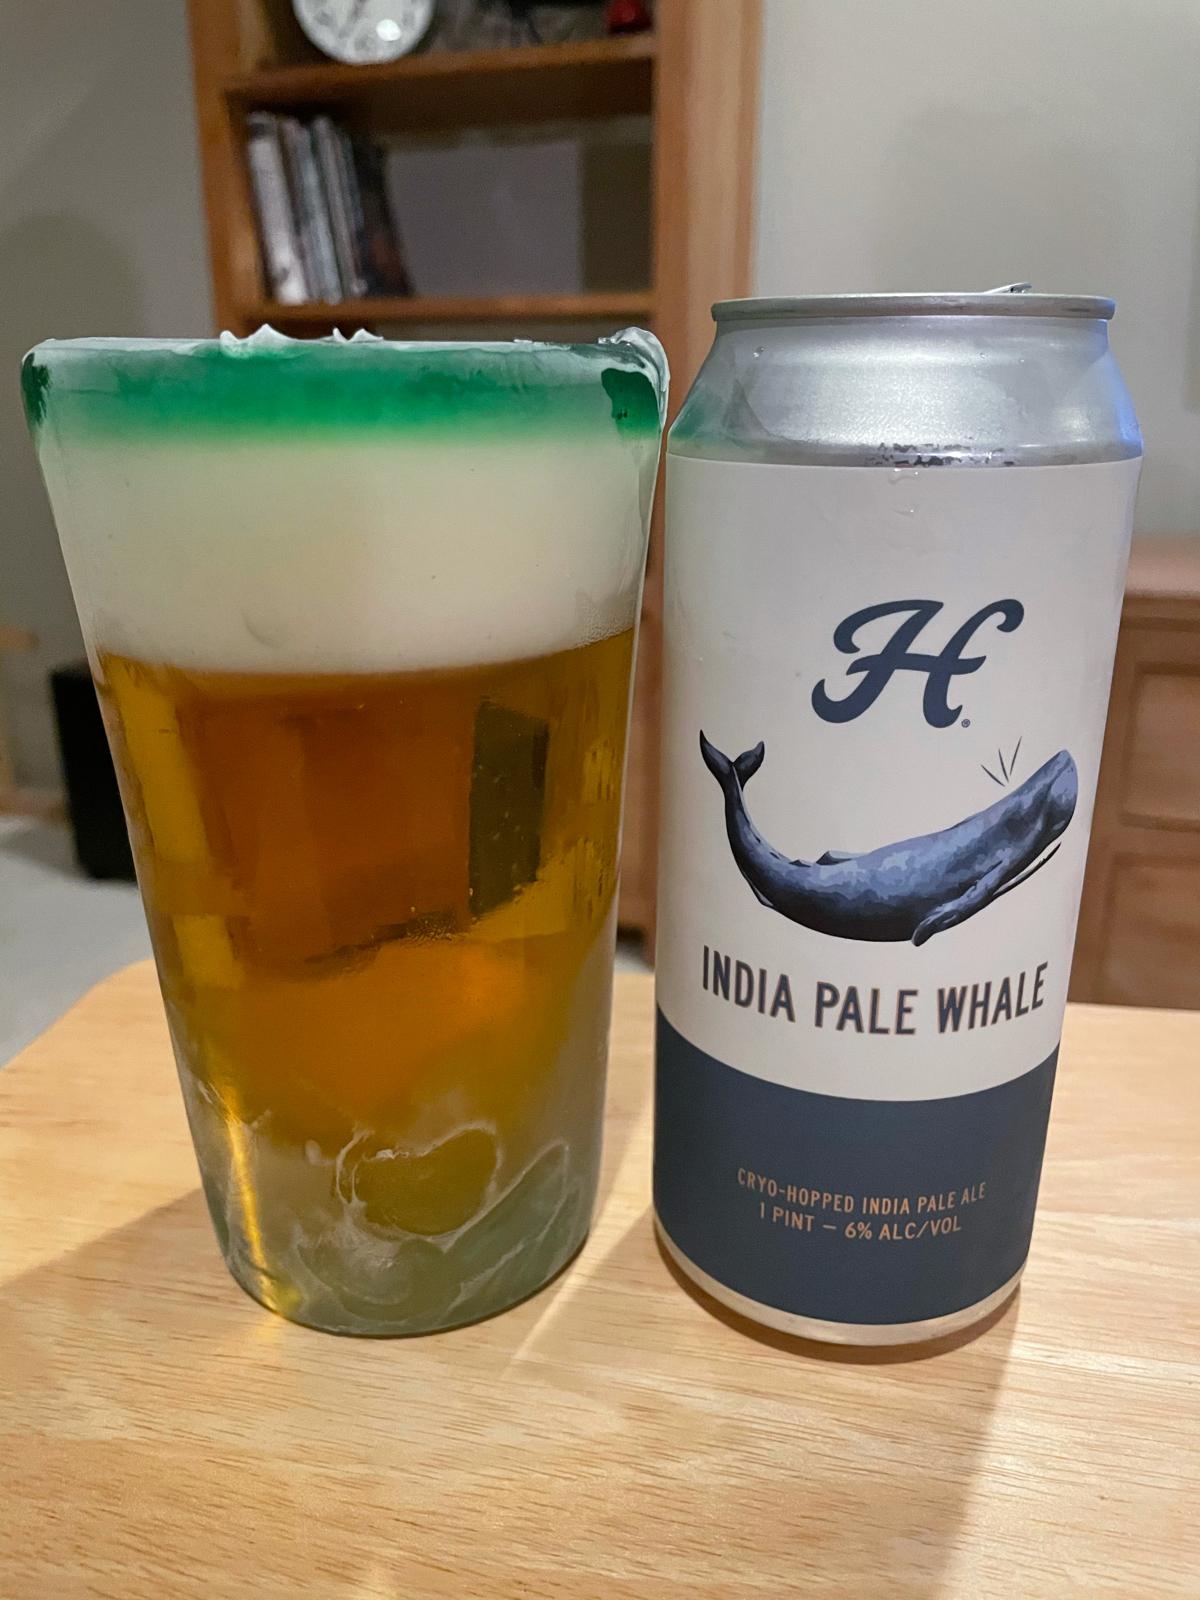 India Pale Whale